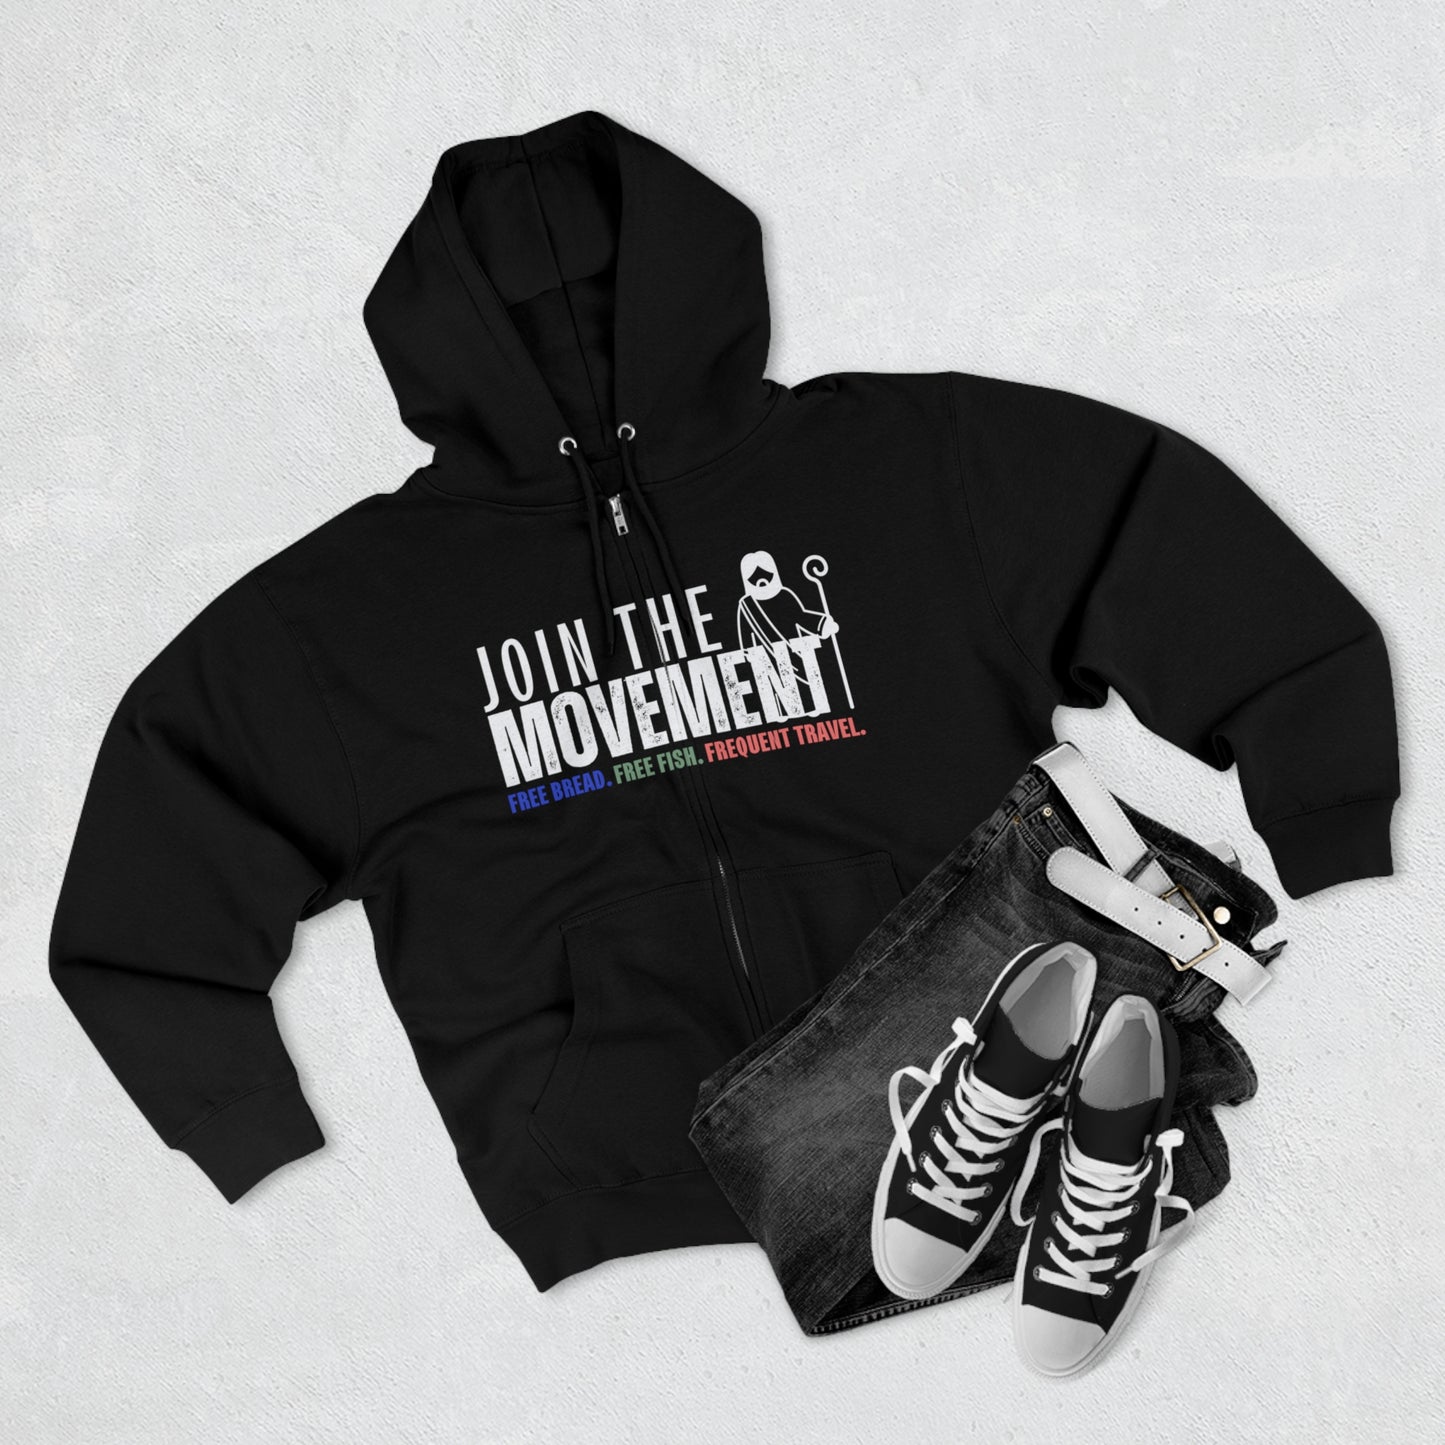 Join the Movement, Christian Zip Hoodie for Men and Women